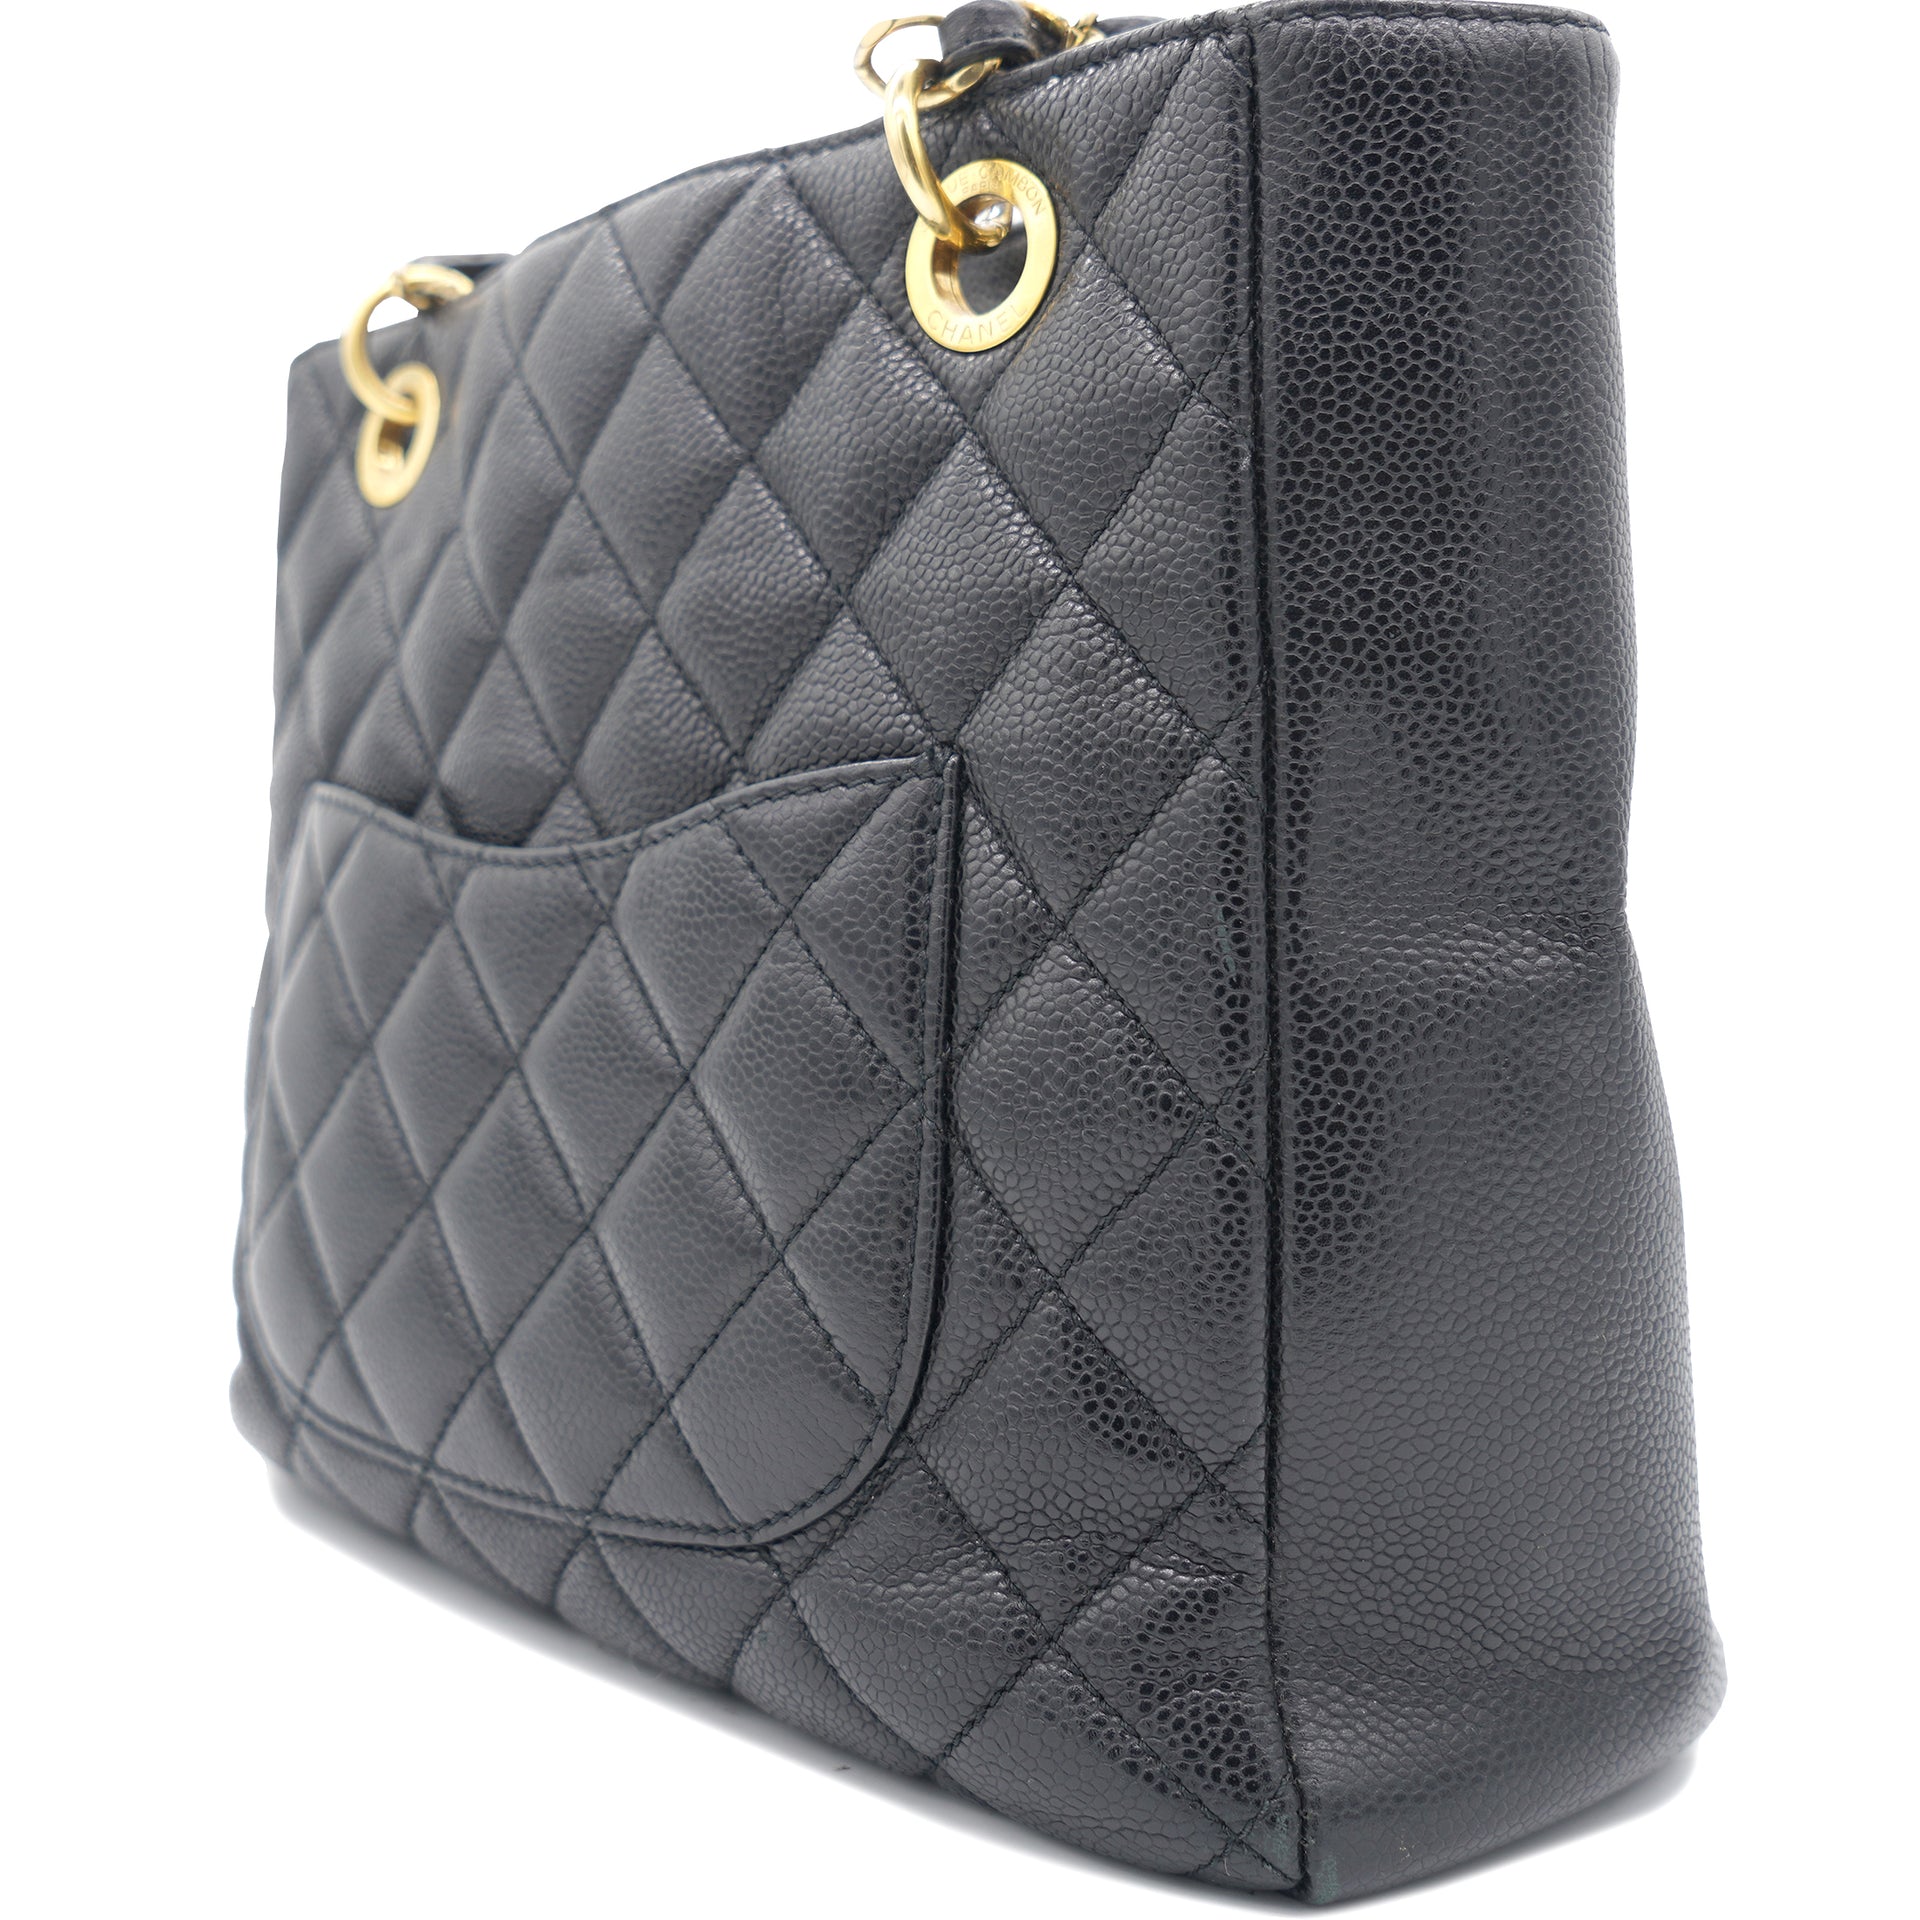 Black Quilted Caviar Leather Petite Shopping Tote